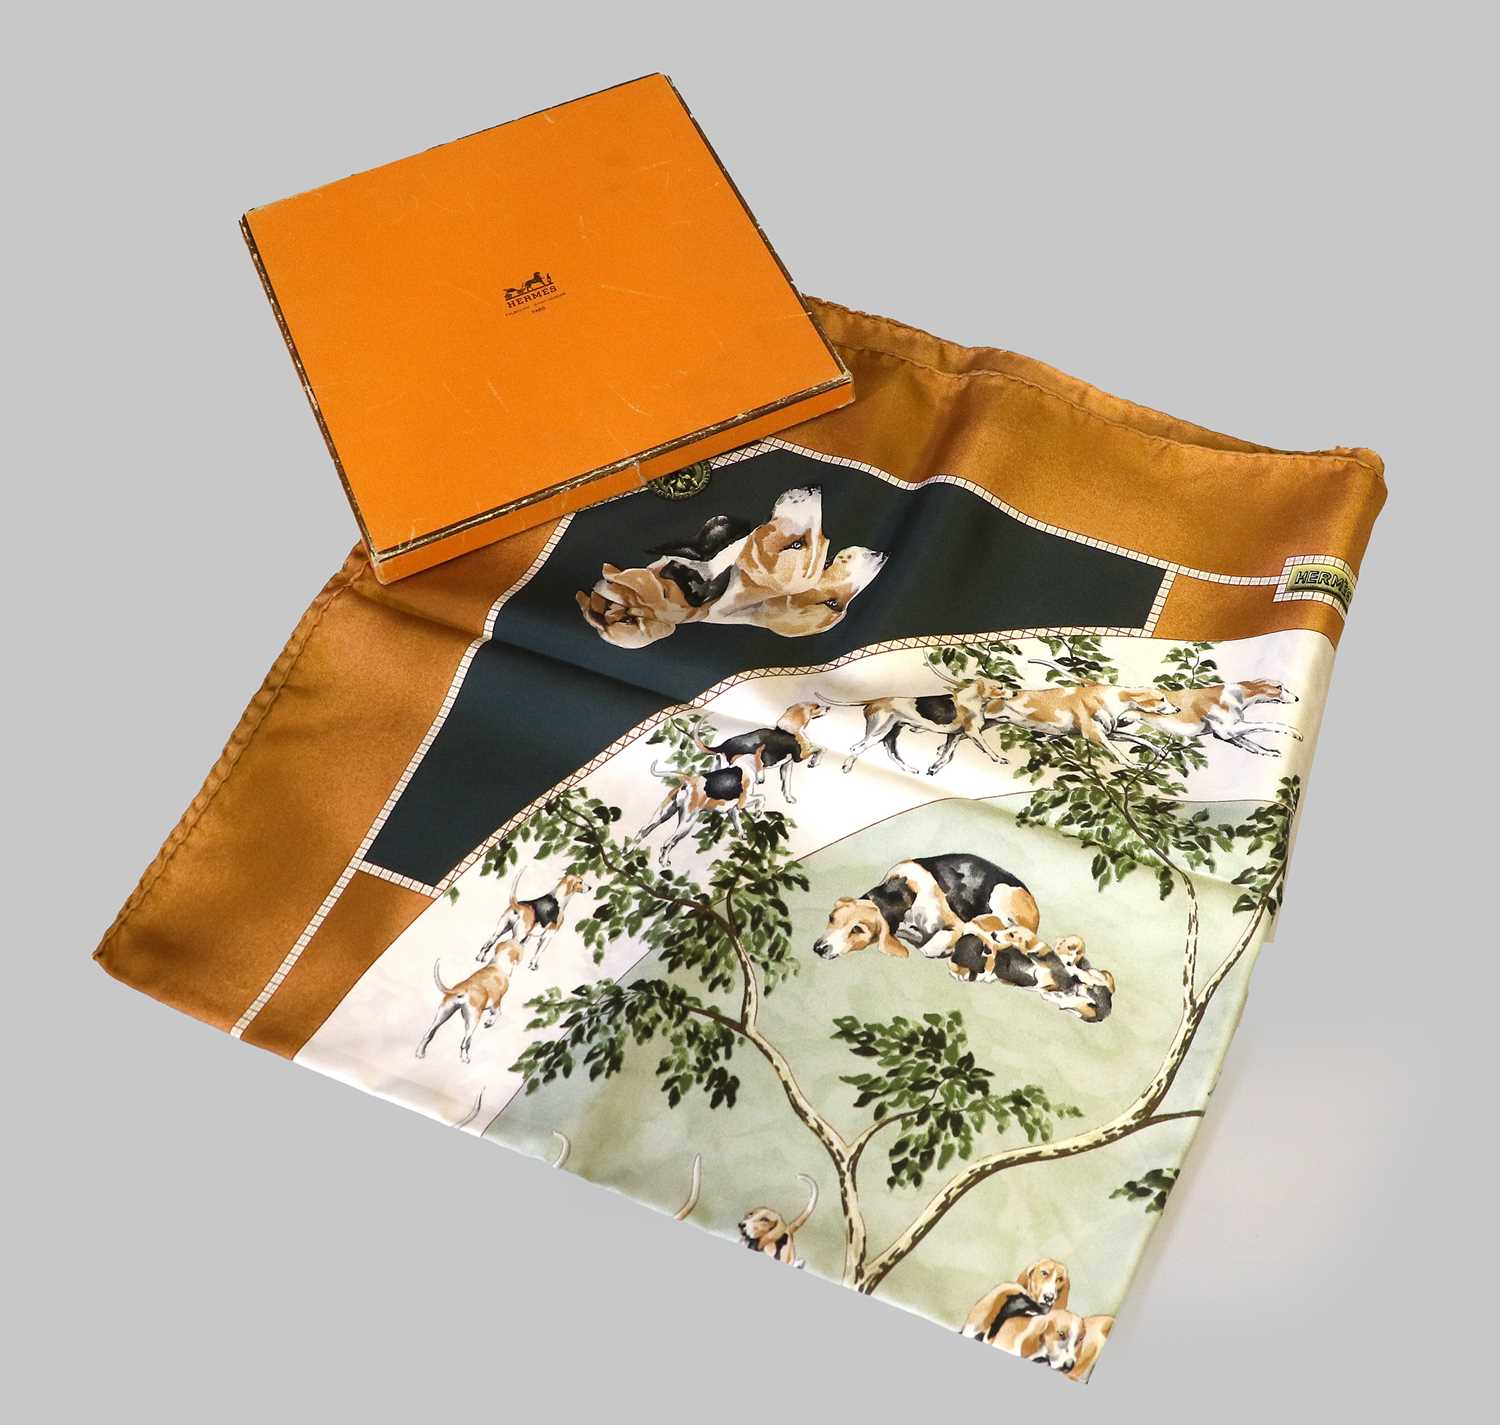 Hermes Silk Scarf Le Poitevin Designed by Hubert de Watrigant, depicting hounds running and standing